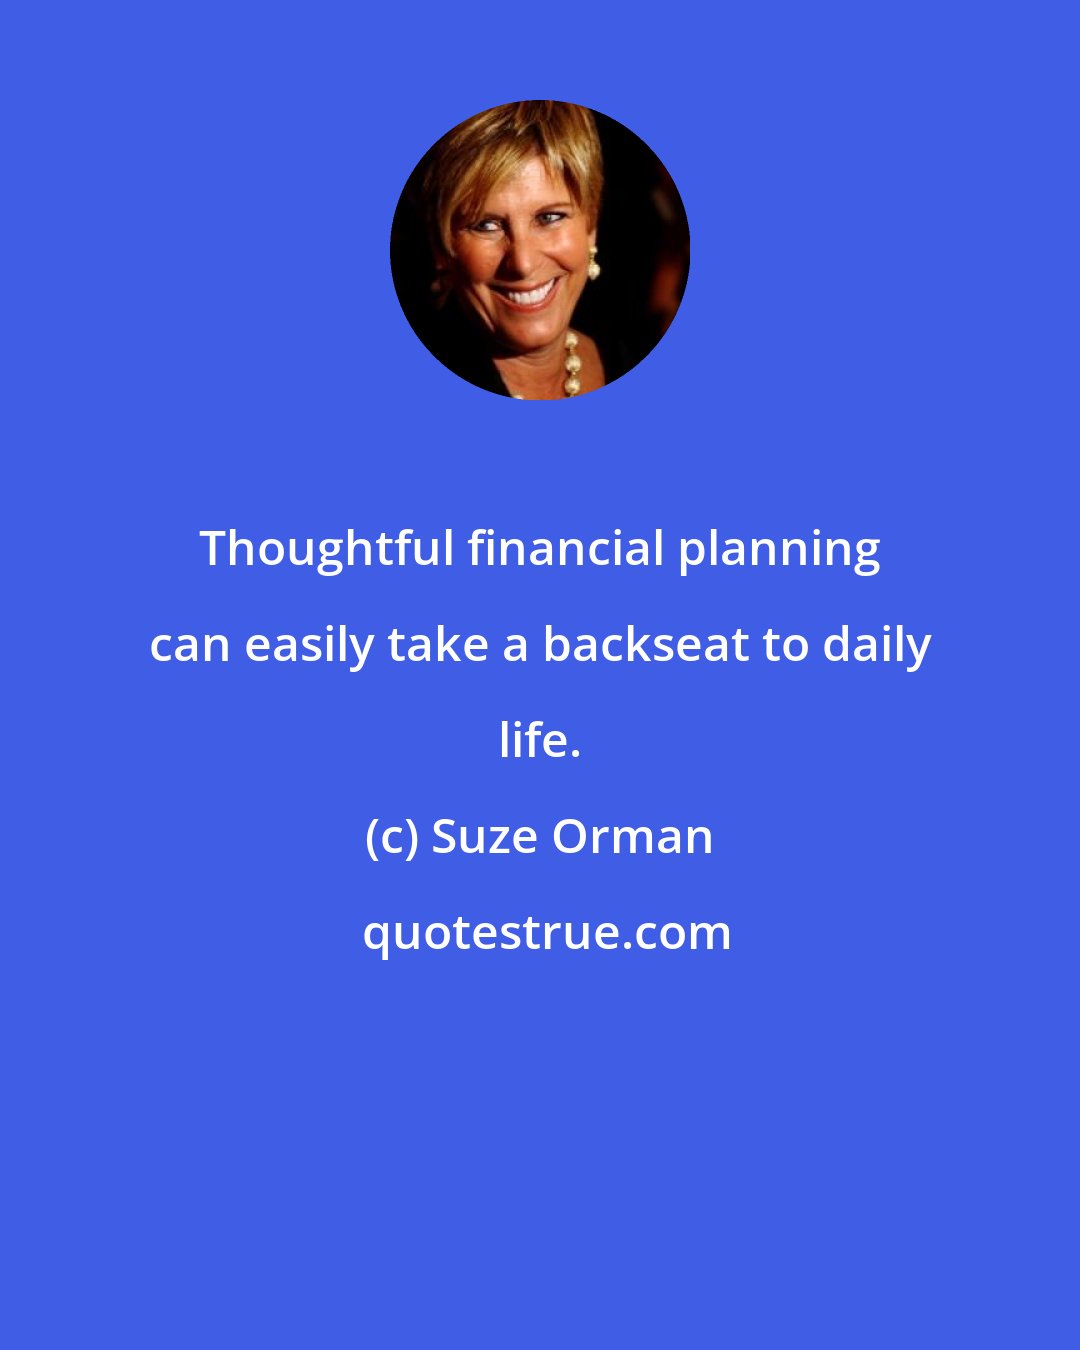 Suze Orman: Thoughtful financial planning can easily take a backseat to daily life.